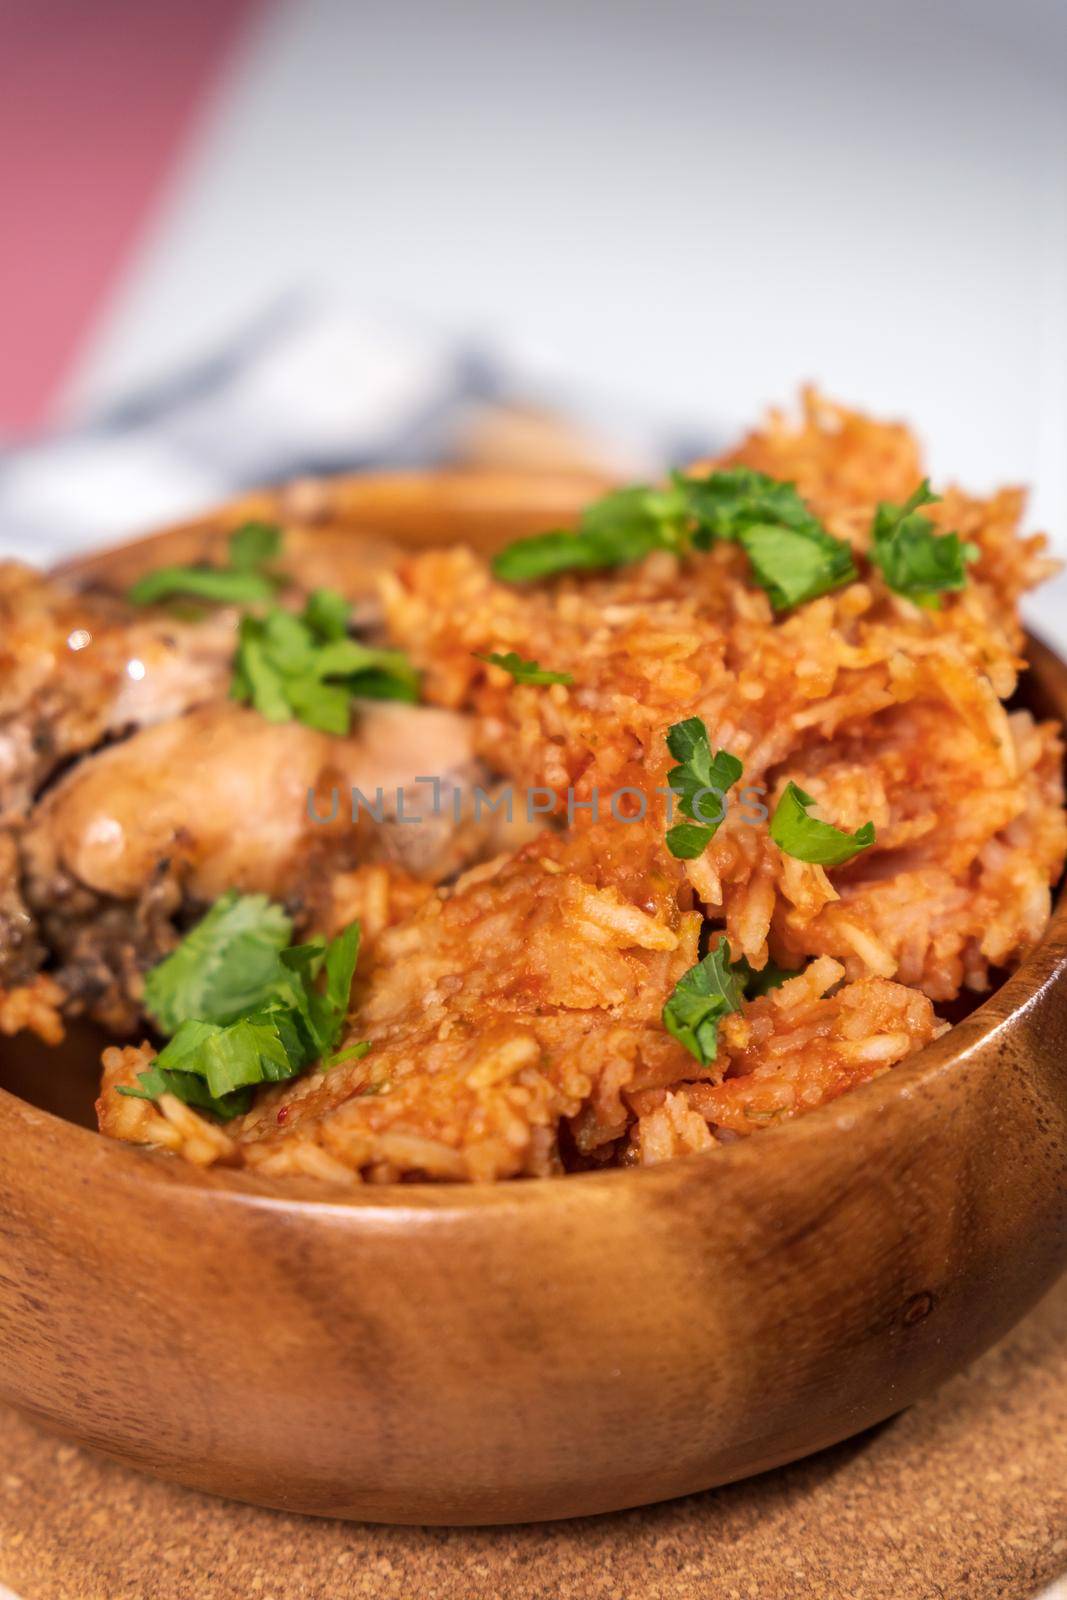 Jollof rice dome for Nigerian Ghanaian food concept. African national dish. Vertical photo